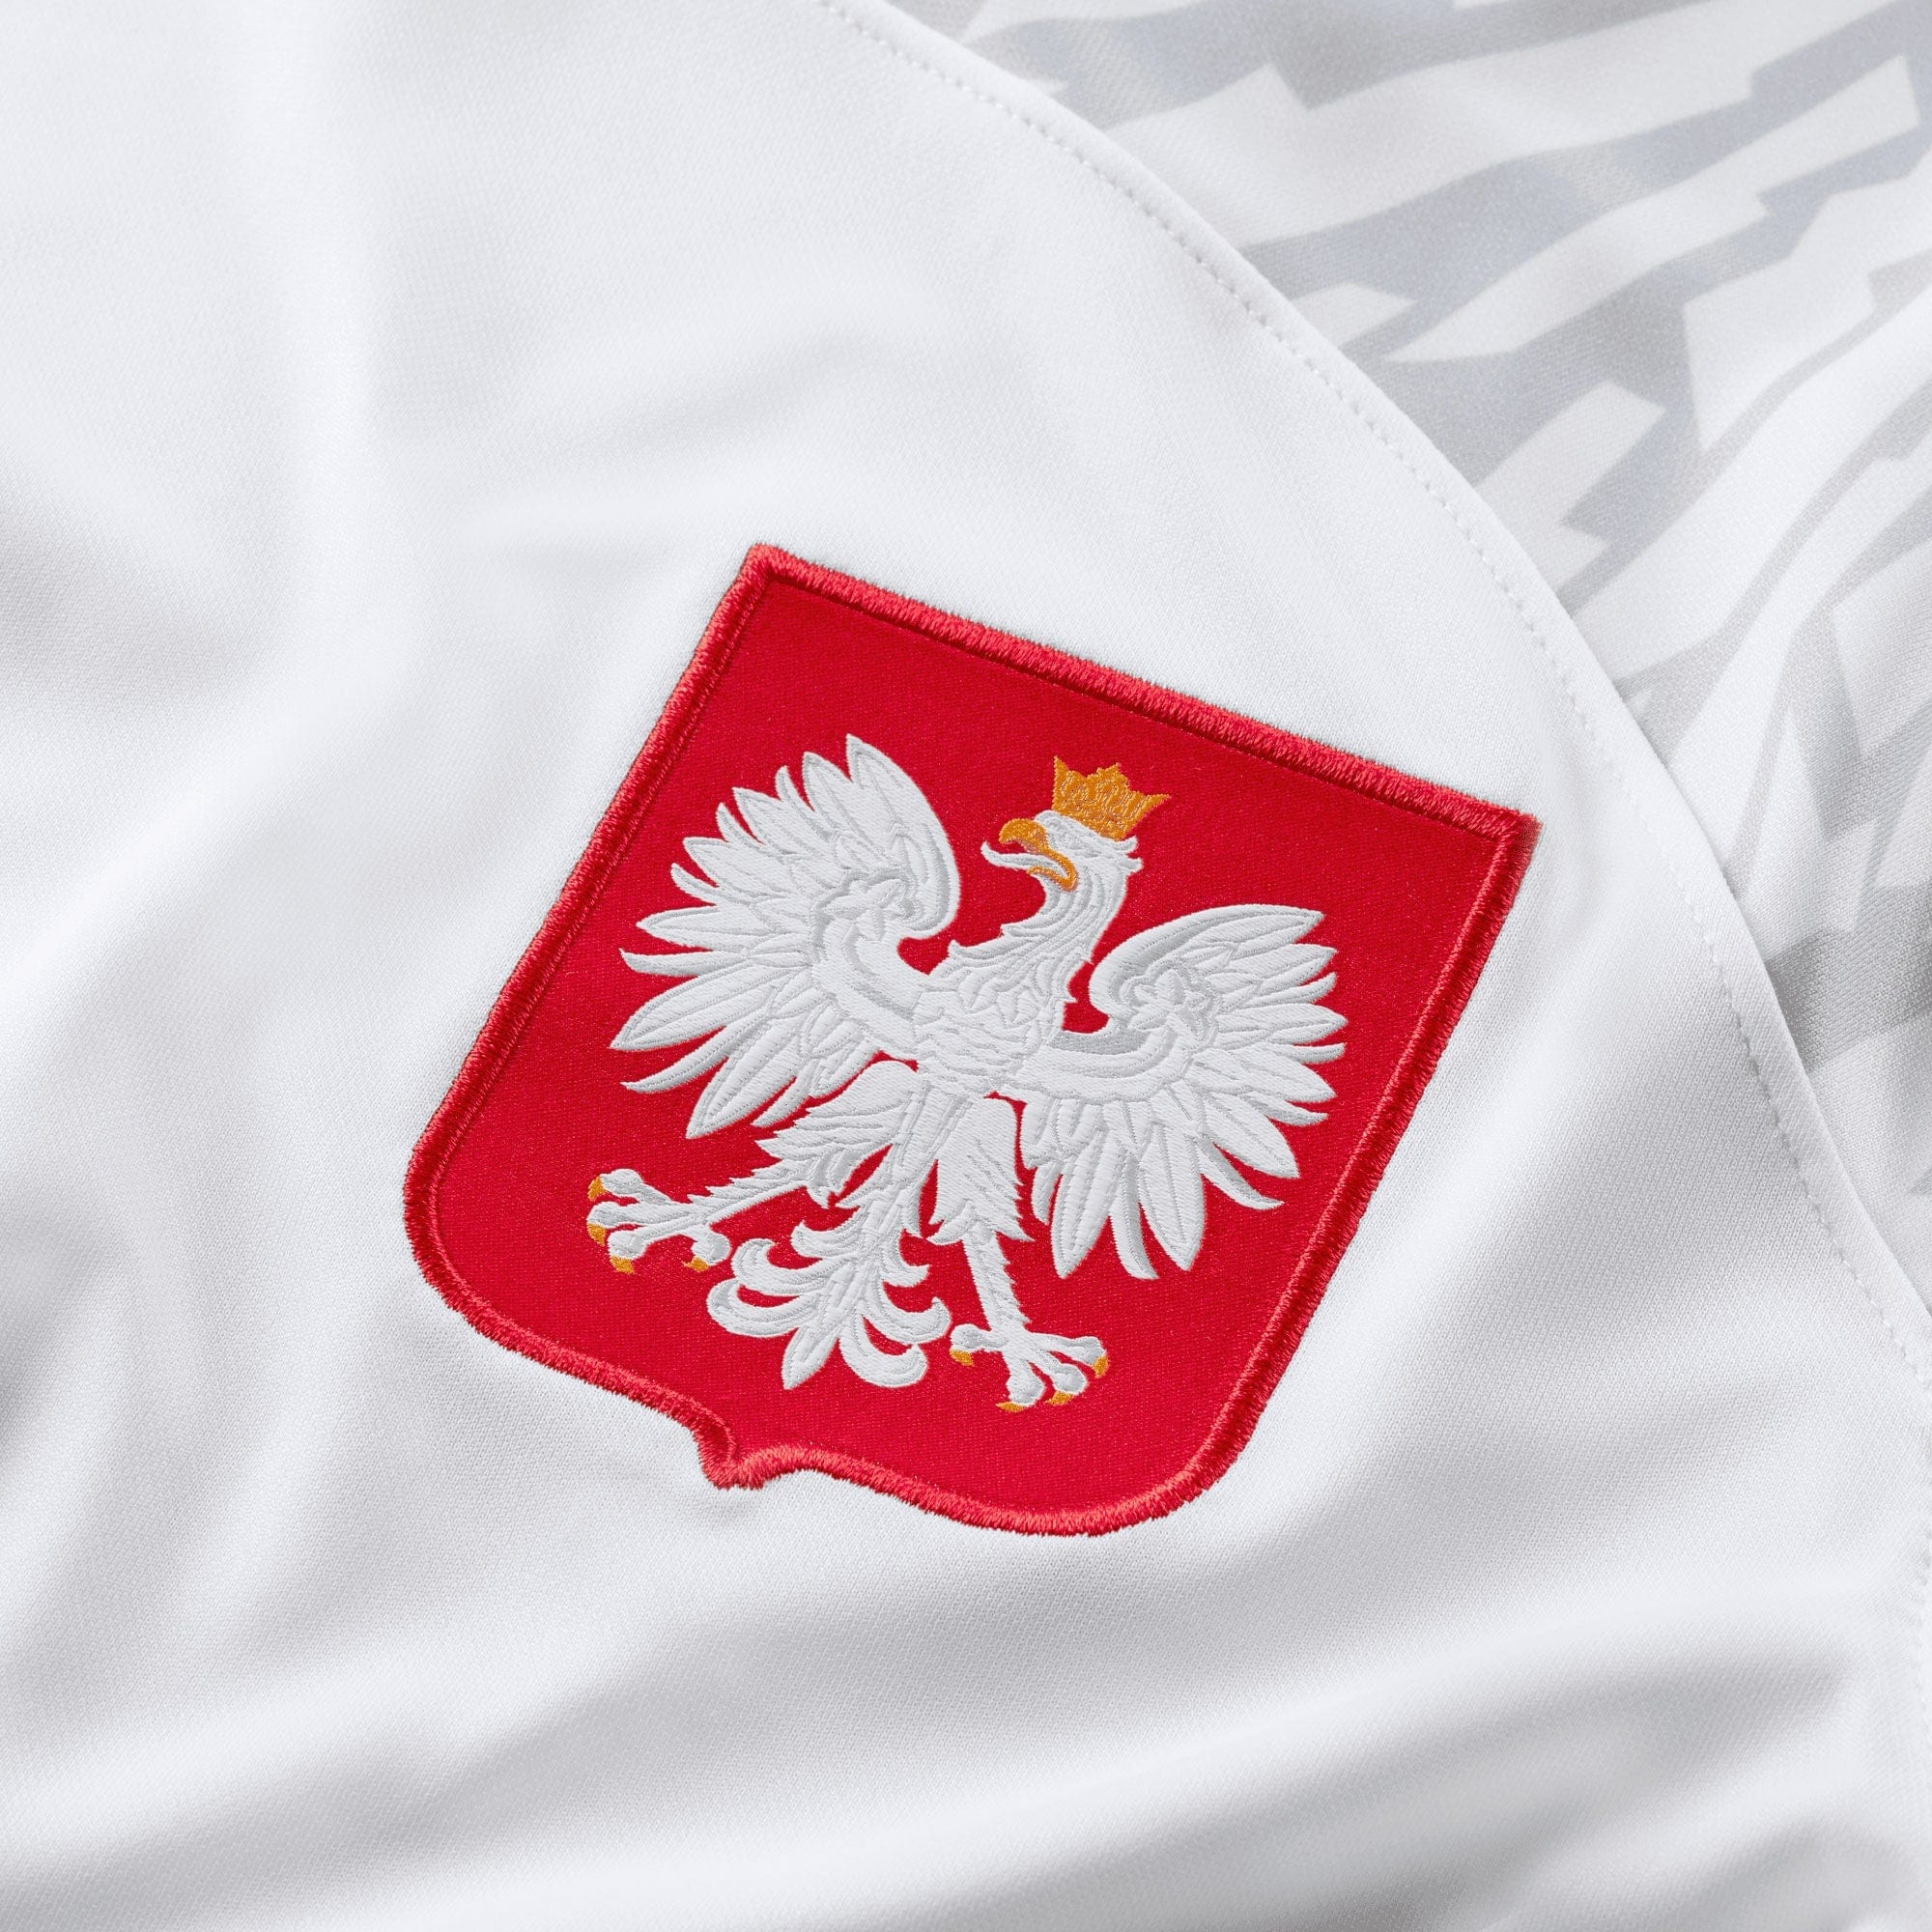 Poland Home Jersey 22/23 Euro 2024 Qualification